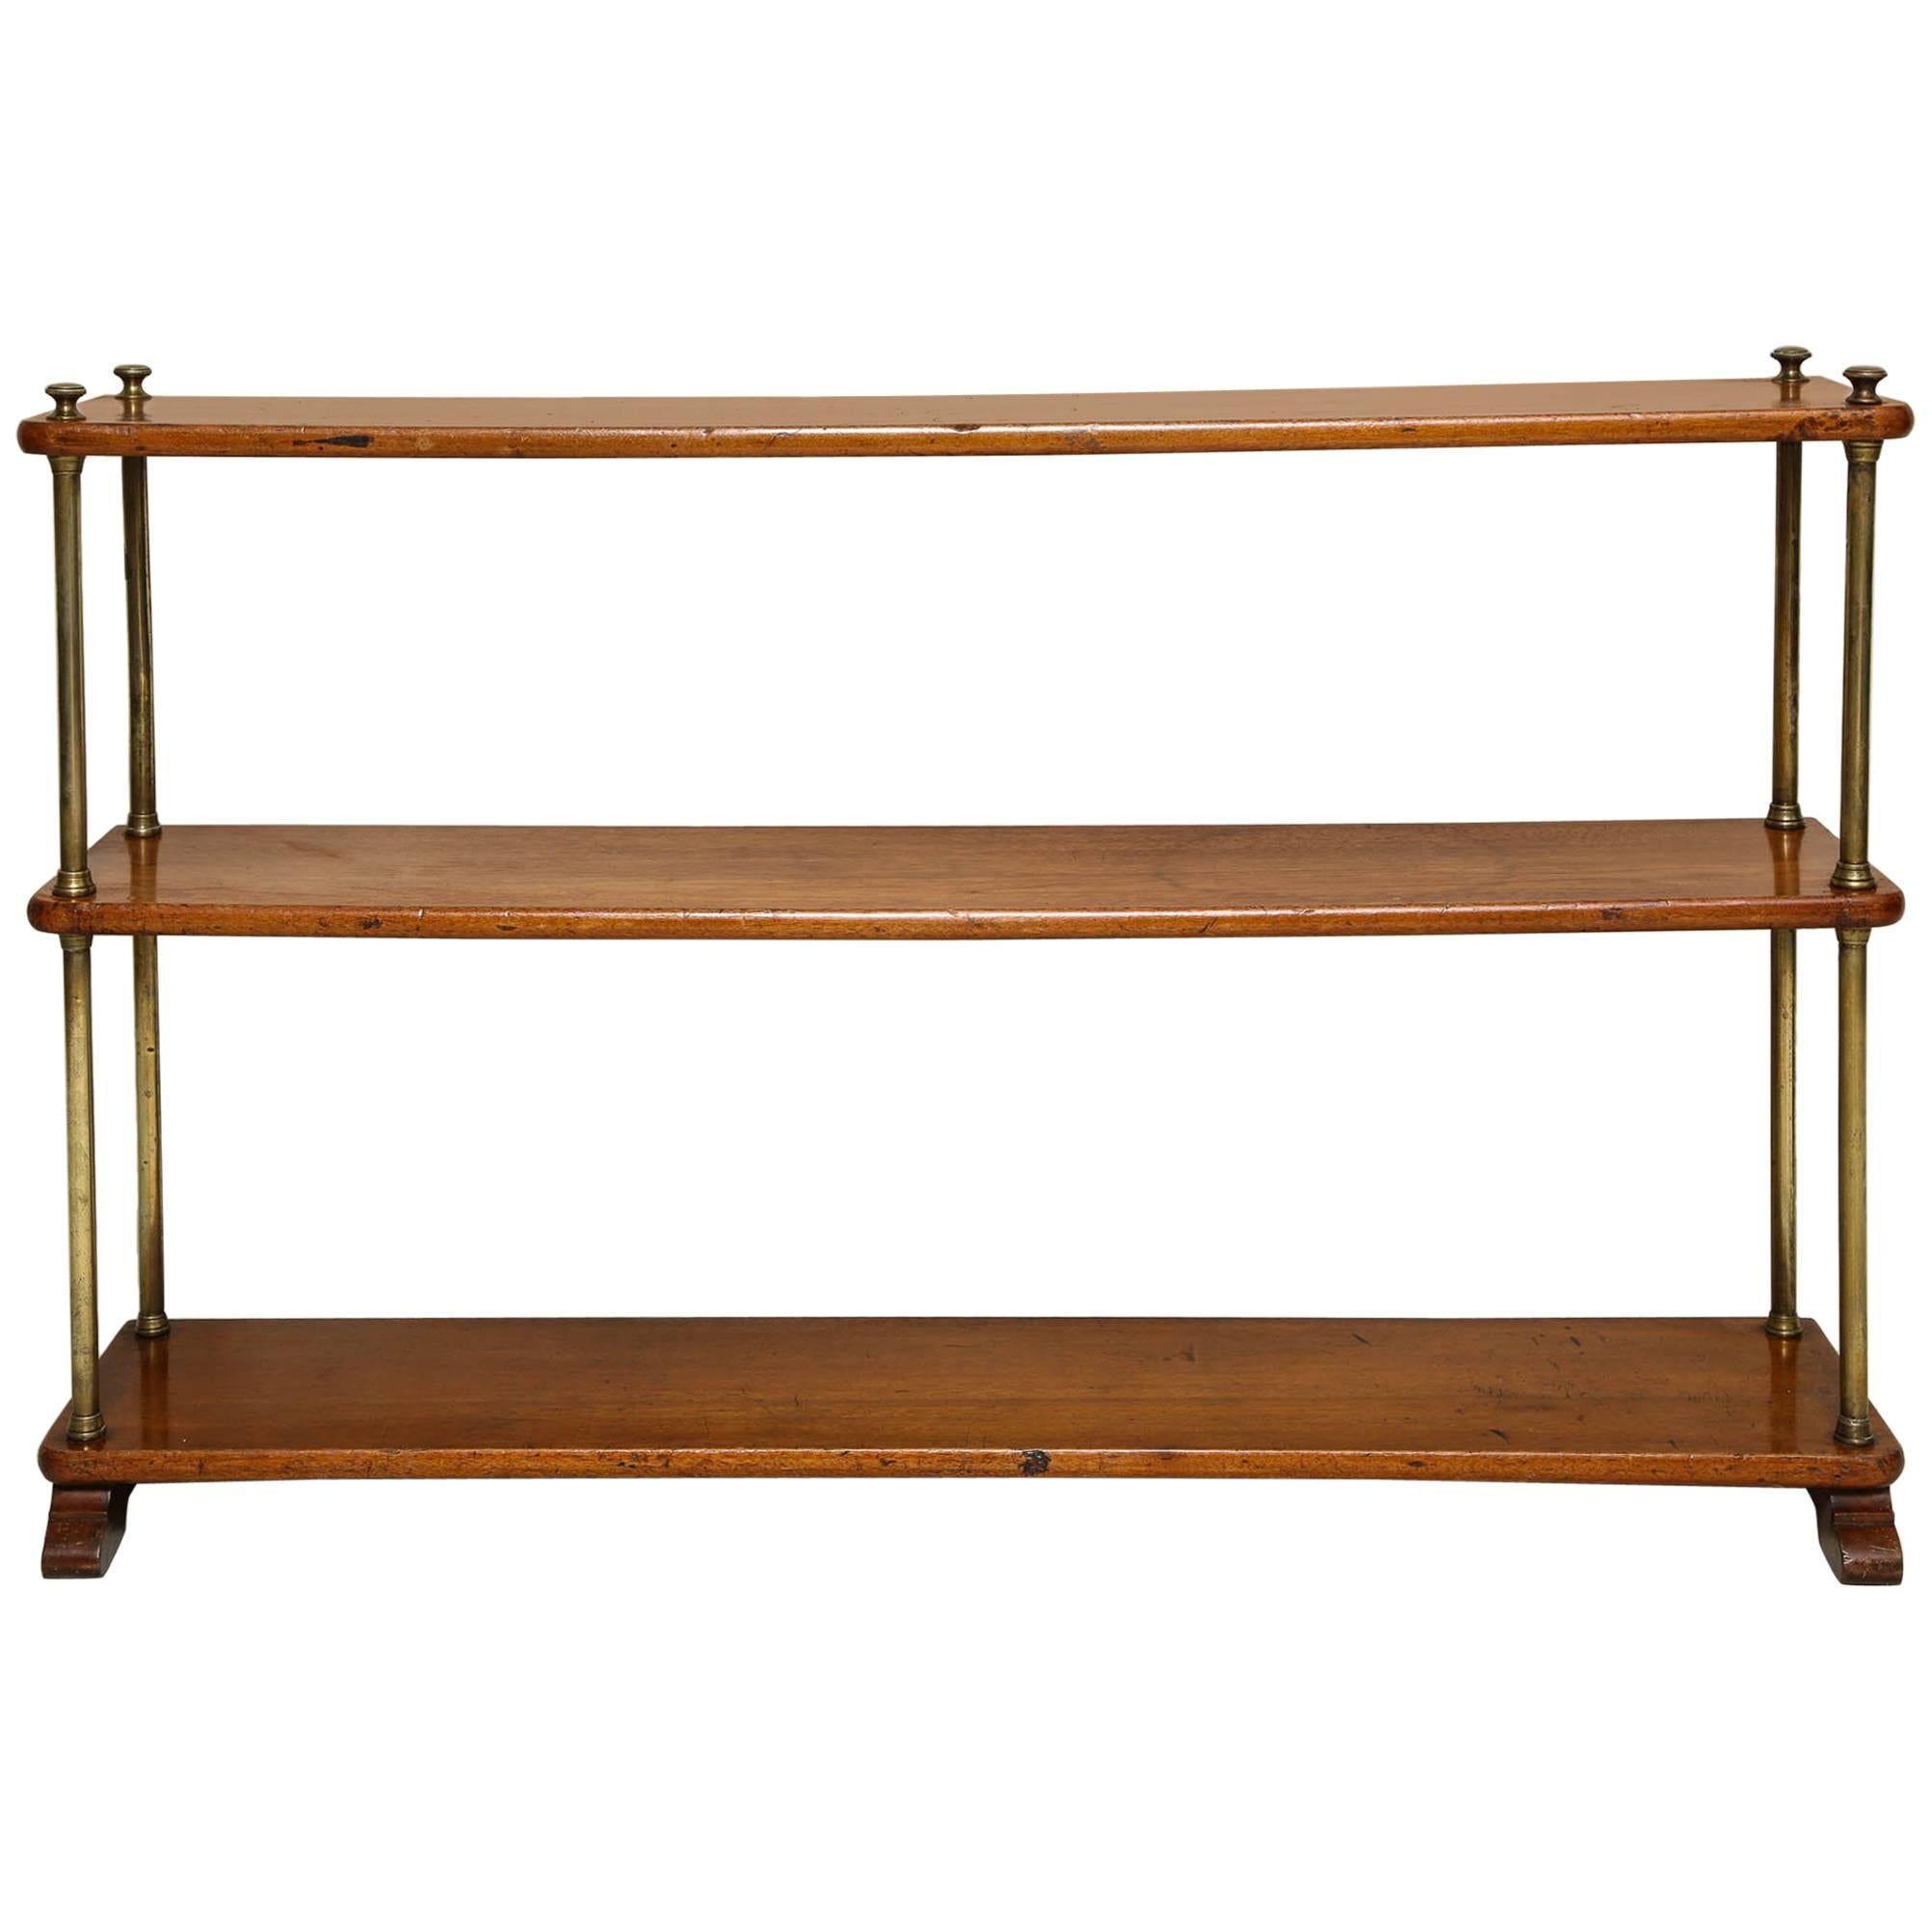 Mahogany and Brass Traveling Campaign Shelf